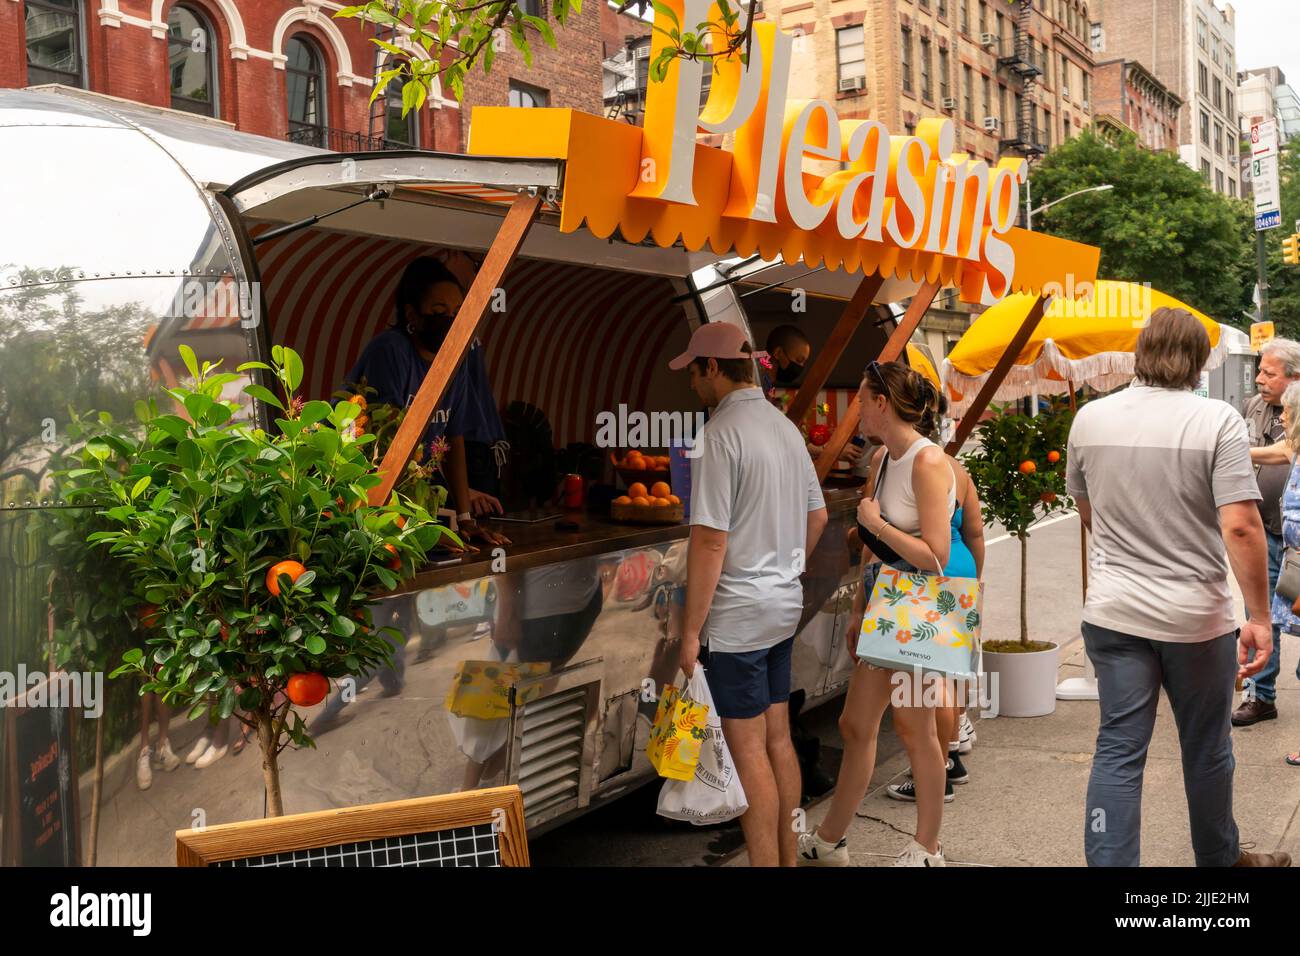 Pop-up Airstream trailer for the cosmetics and skincare compnay Pleasing in Greenwich Village in New York on Sunday, July 17, 2022.(© Richard B. Levine) Stock Photo